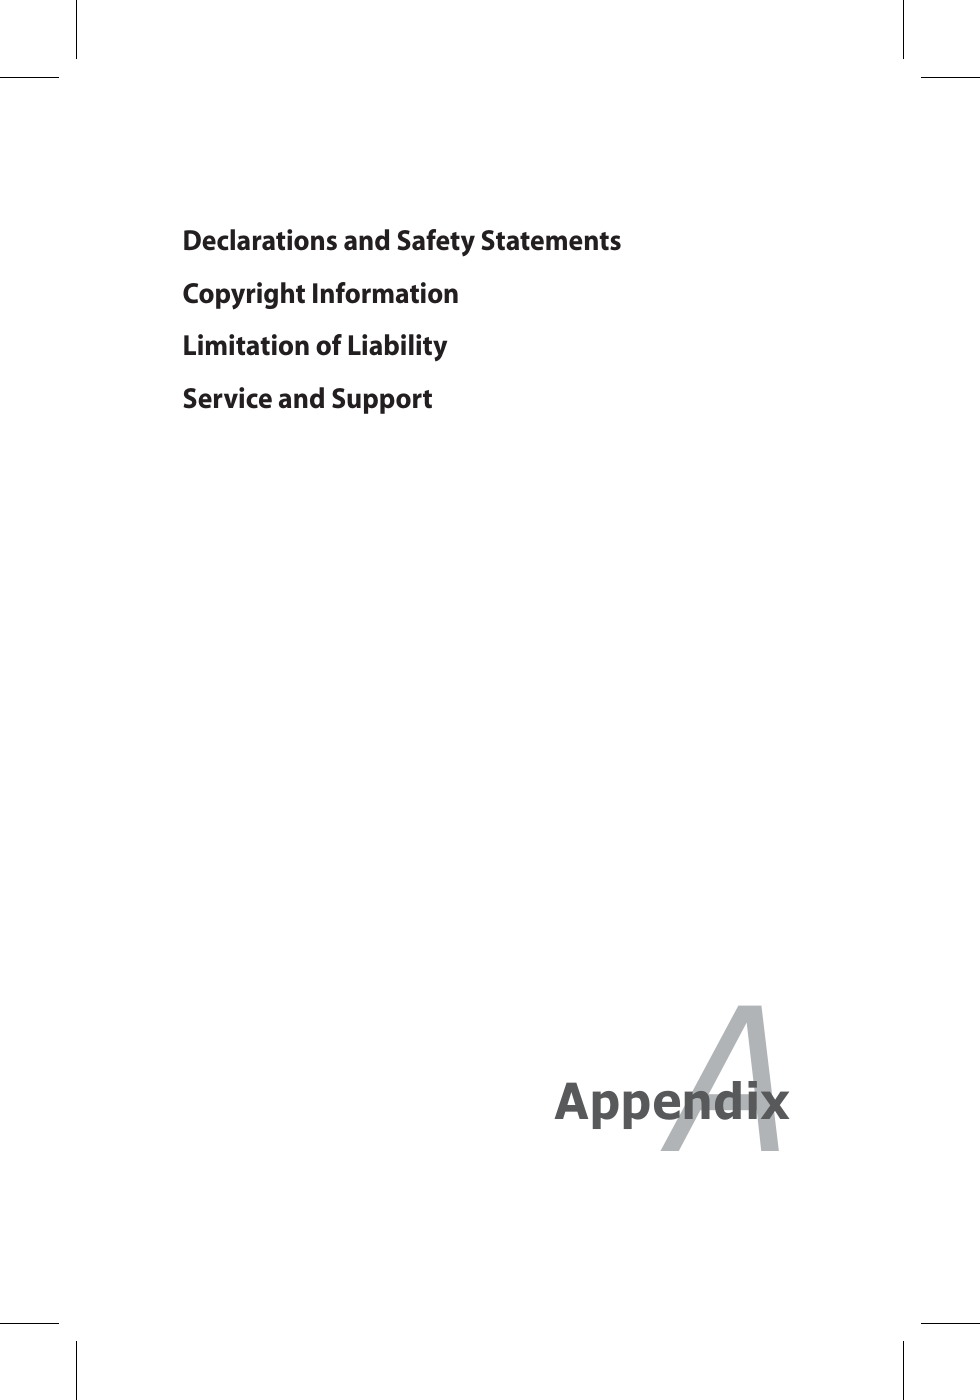 Declarations and Safety StatementsCopyright InformationLimitation of LiabilityService and SupportAAppendix